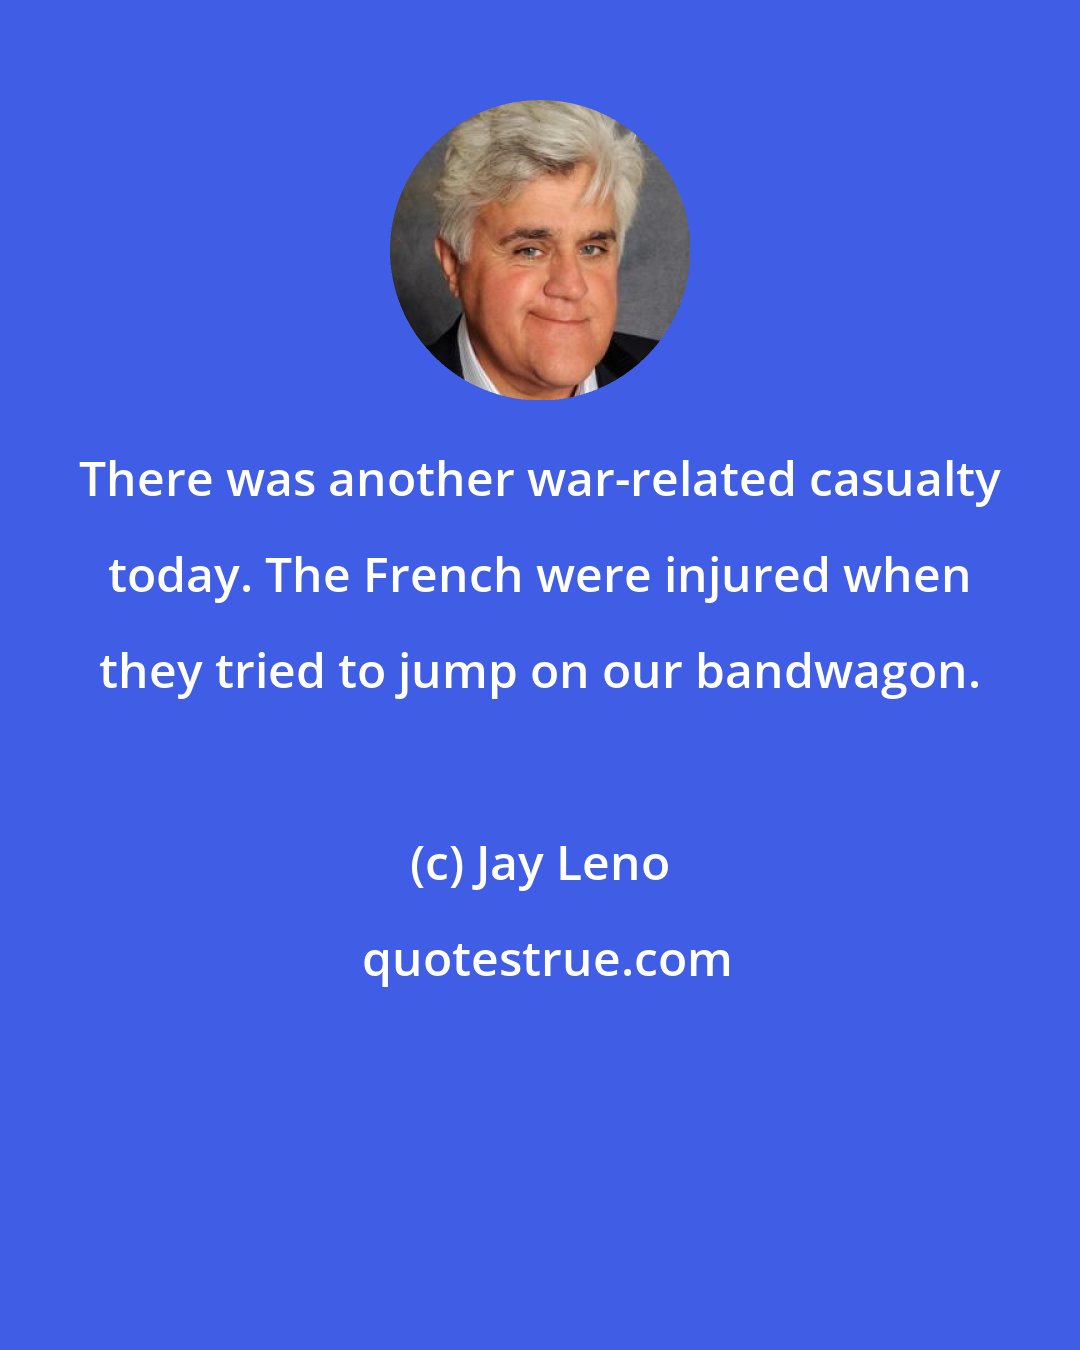 Jay Leno: There was another war-related casualty today. The French were injured when they tried to jump on our bandwagon.